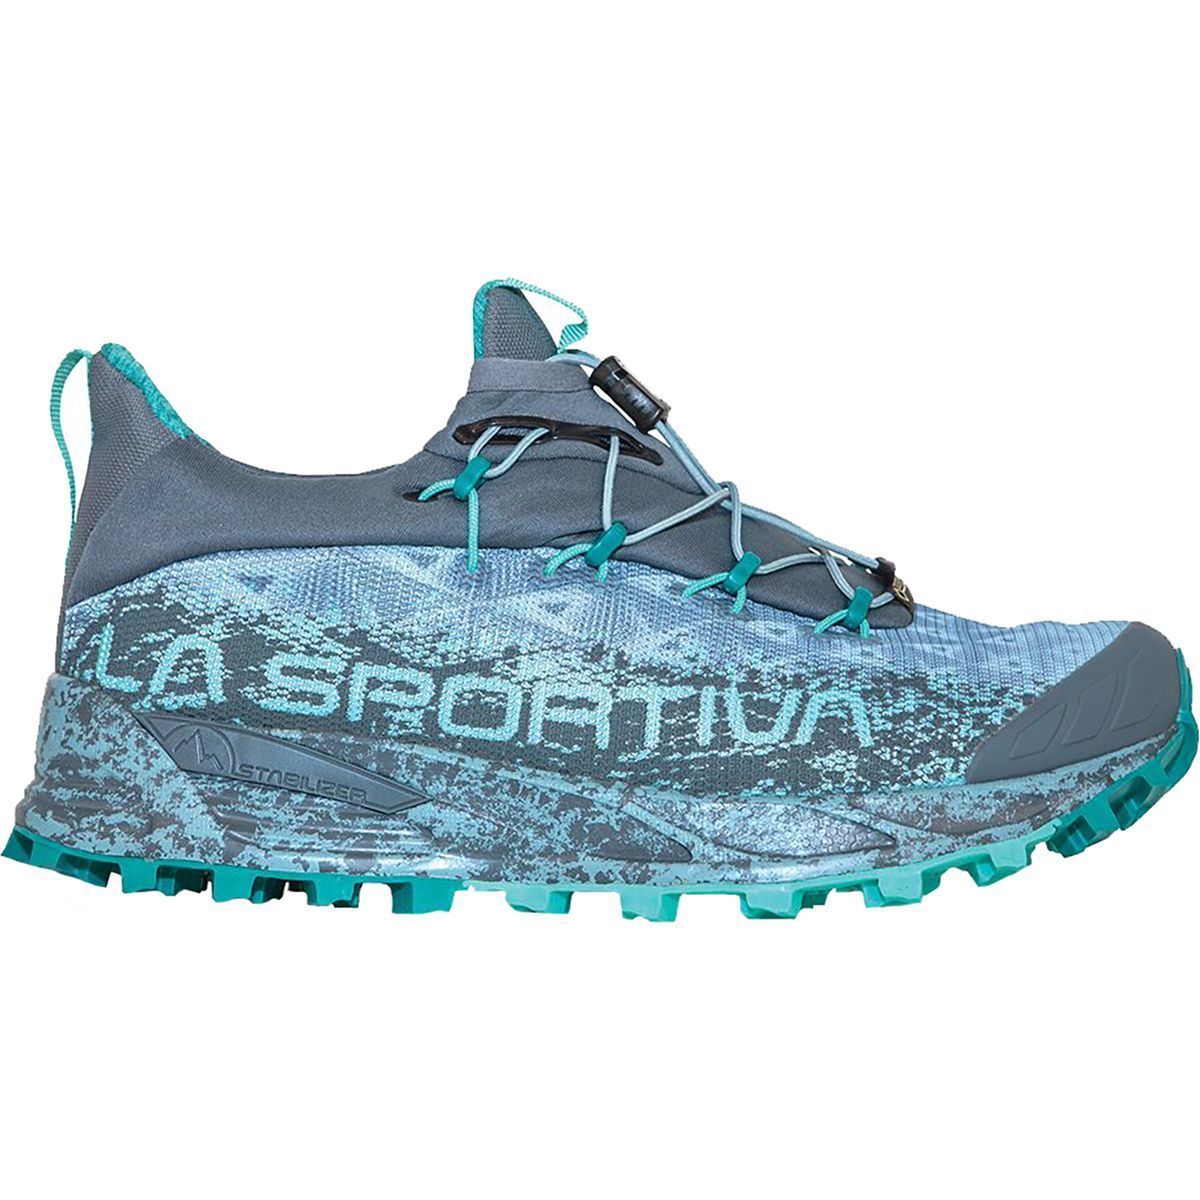 running shoes for snow and slush